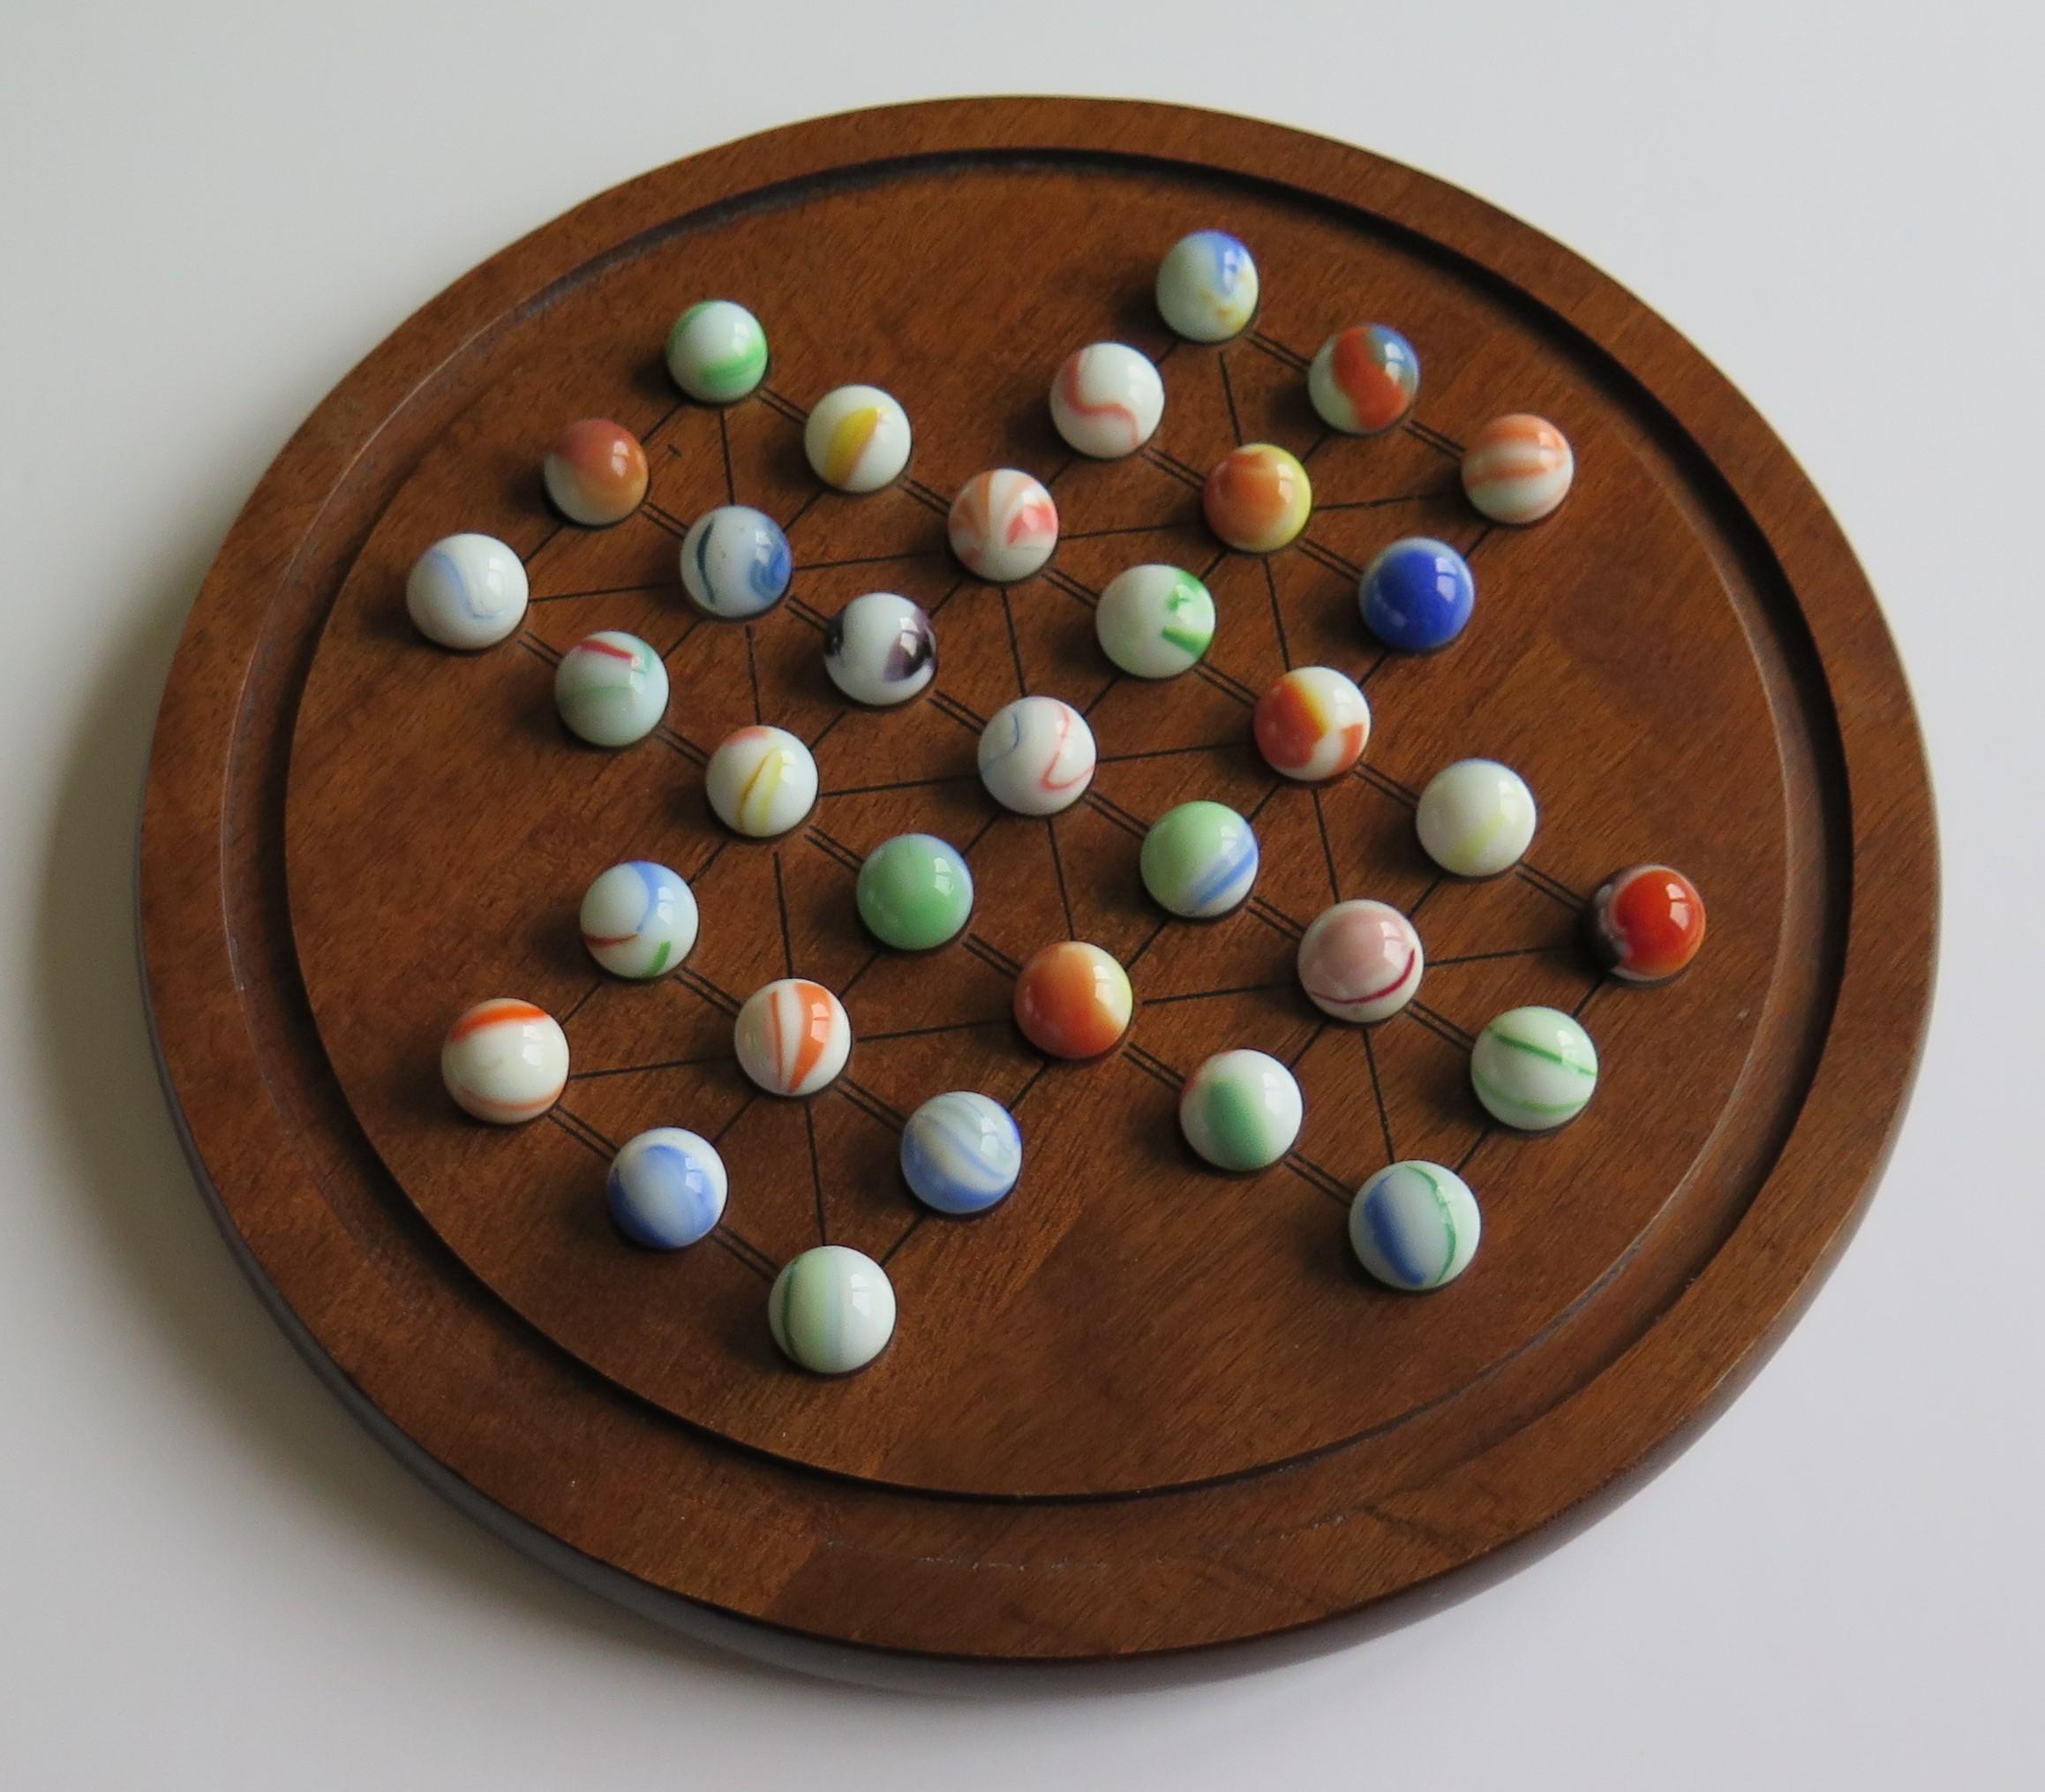 Folk Art Marble Solitaire Game Hardwood Board with 33 Old Glass swirl Marbles